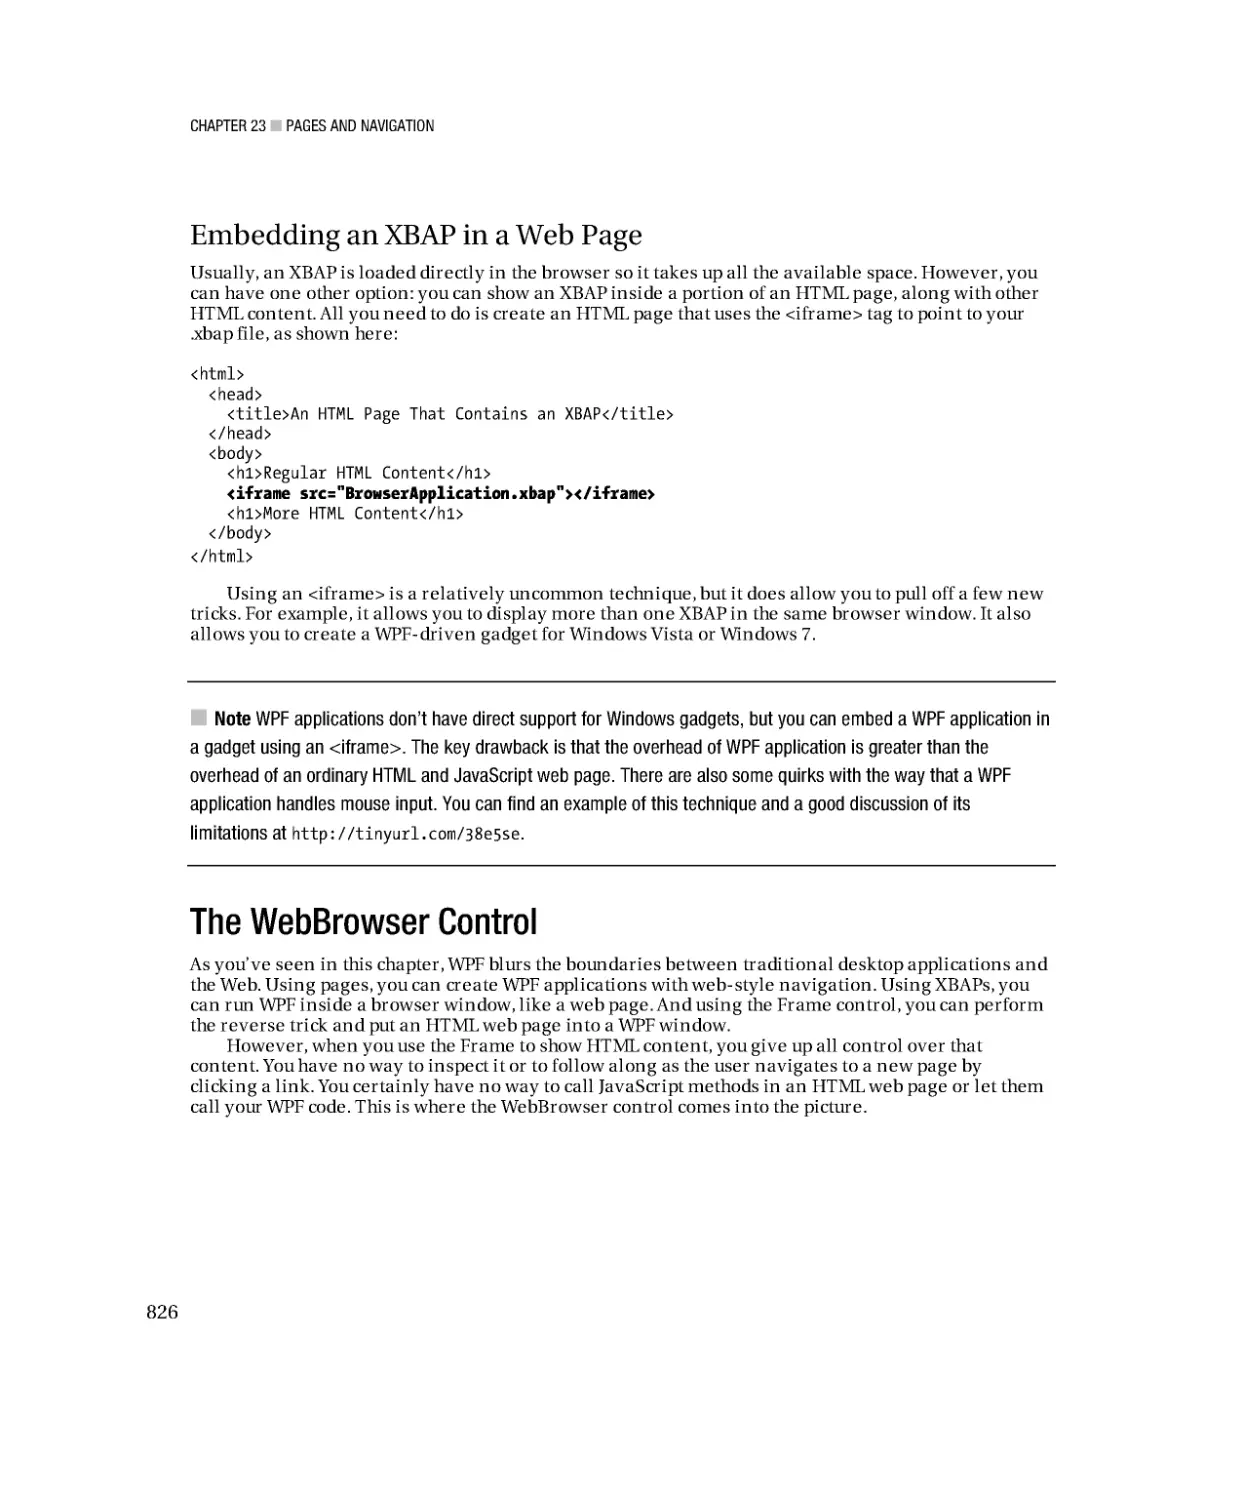 Embedding an XBAP in a Web Page
The WebBrowser Control